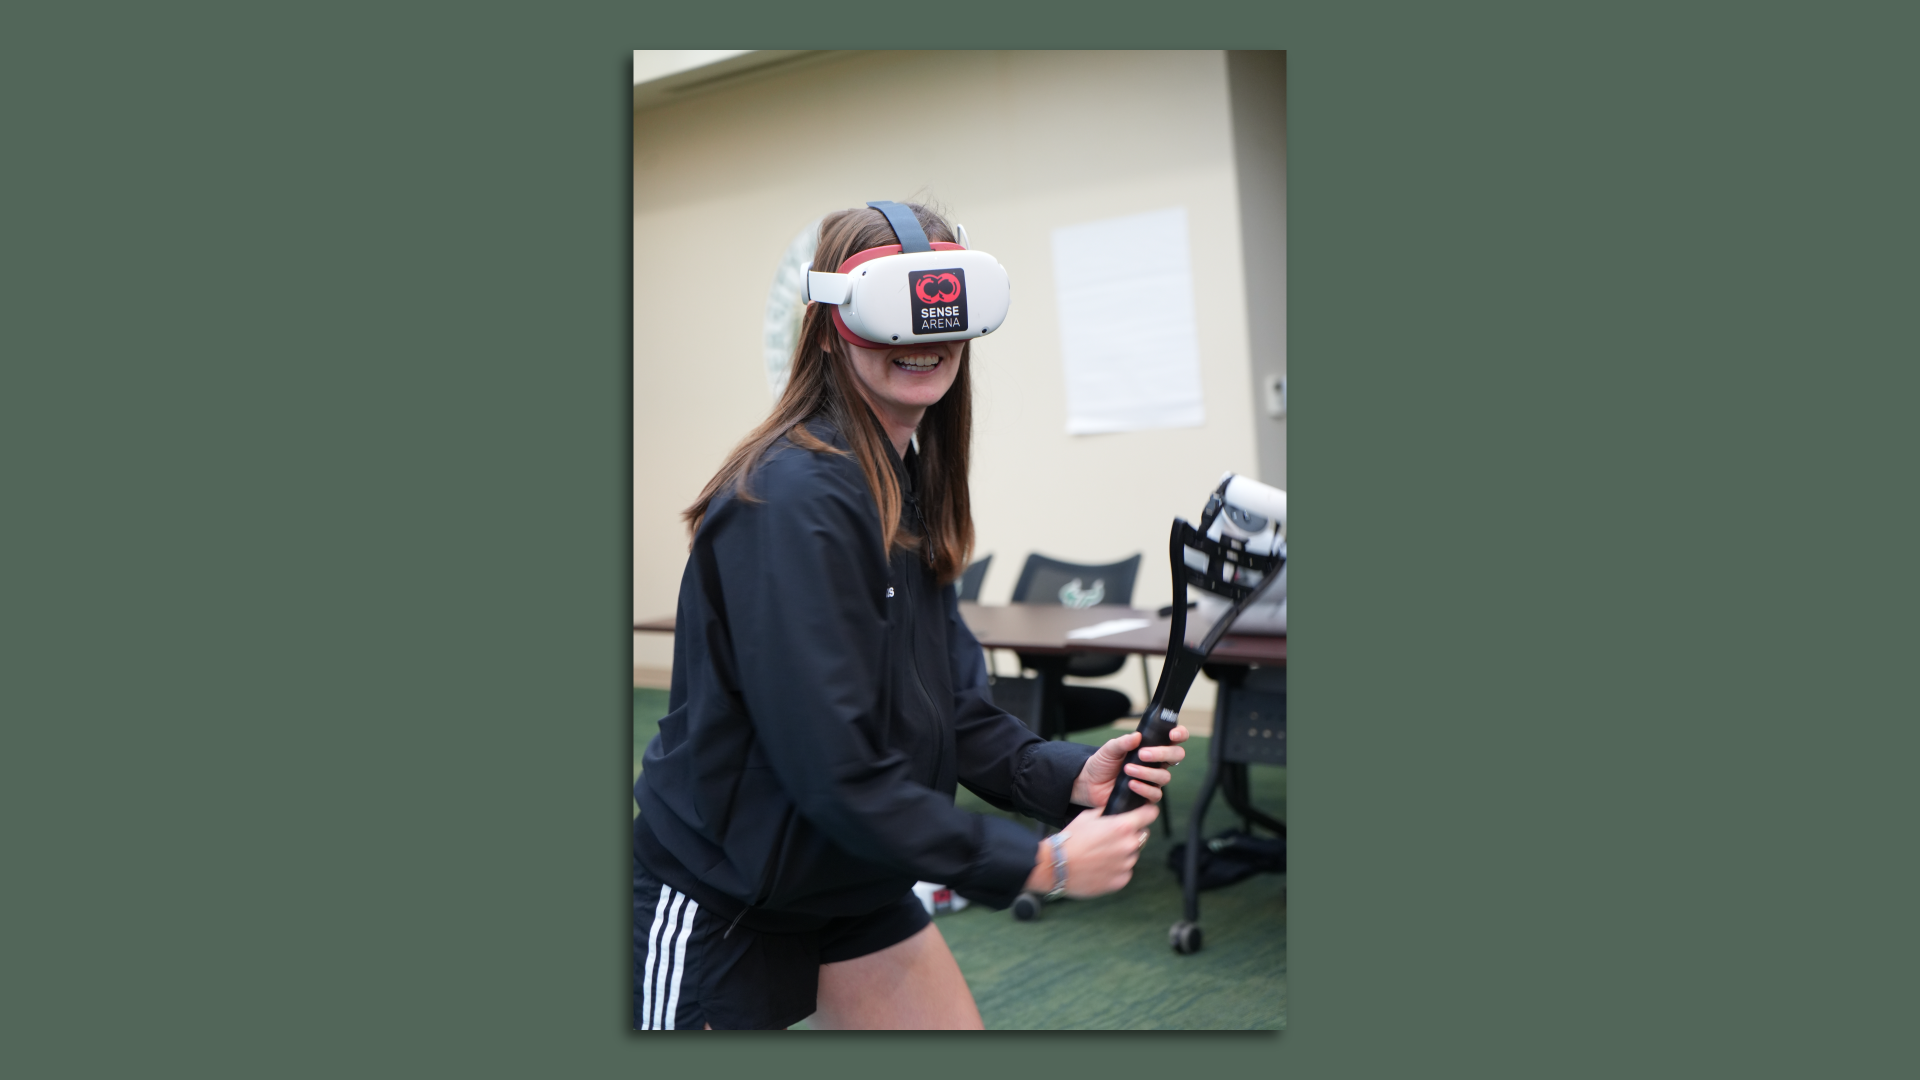 A female uses virtual reality headset and raquet to practice tennis.